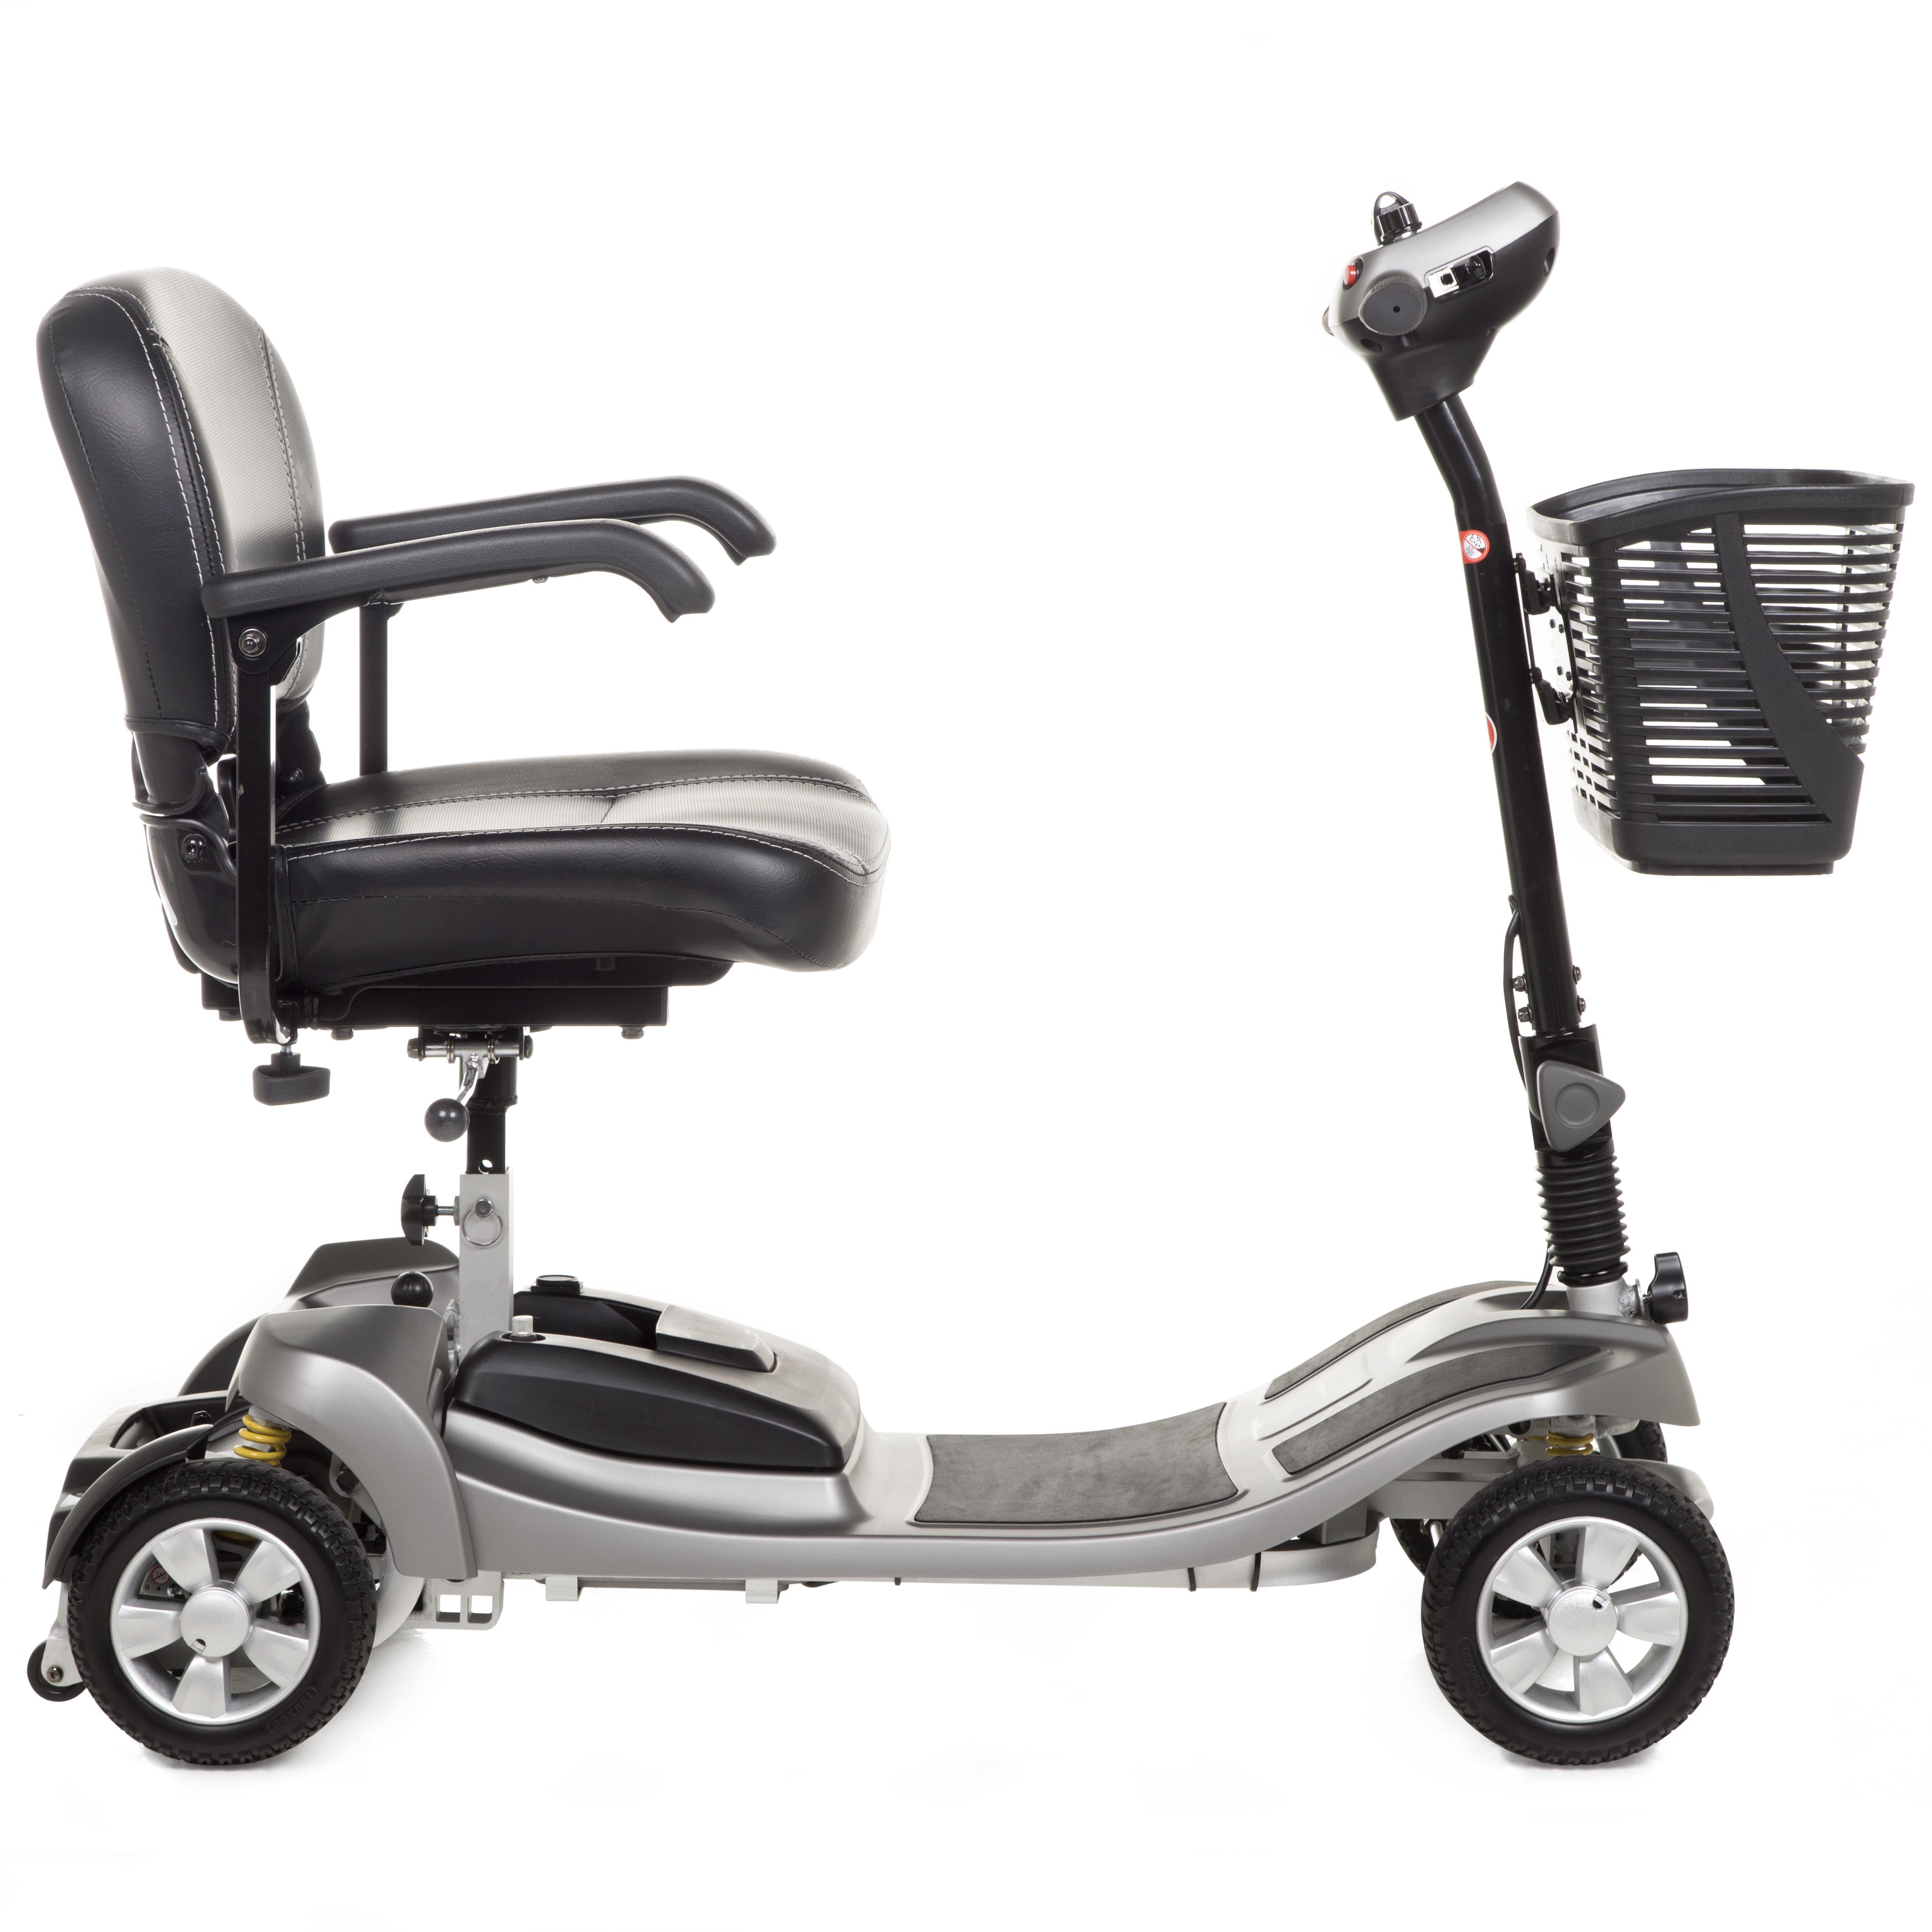 Alumina Pro Mobility Scooter with suspension